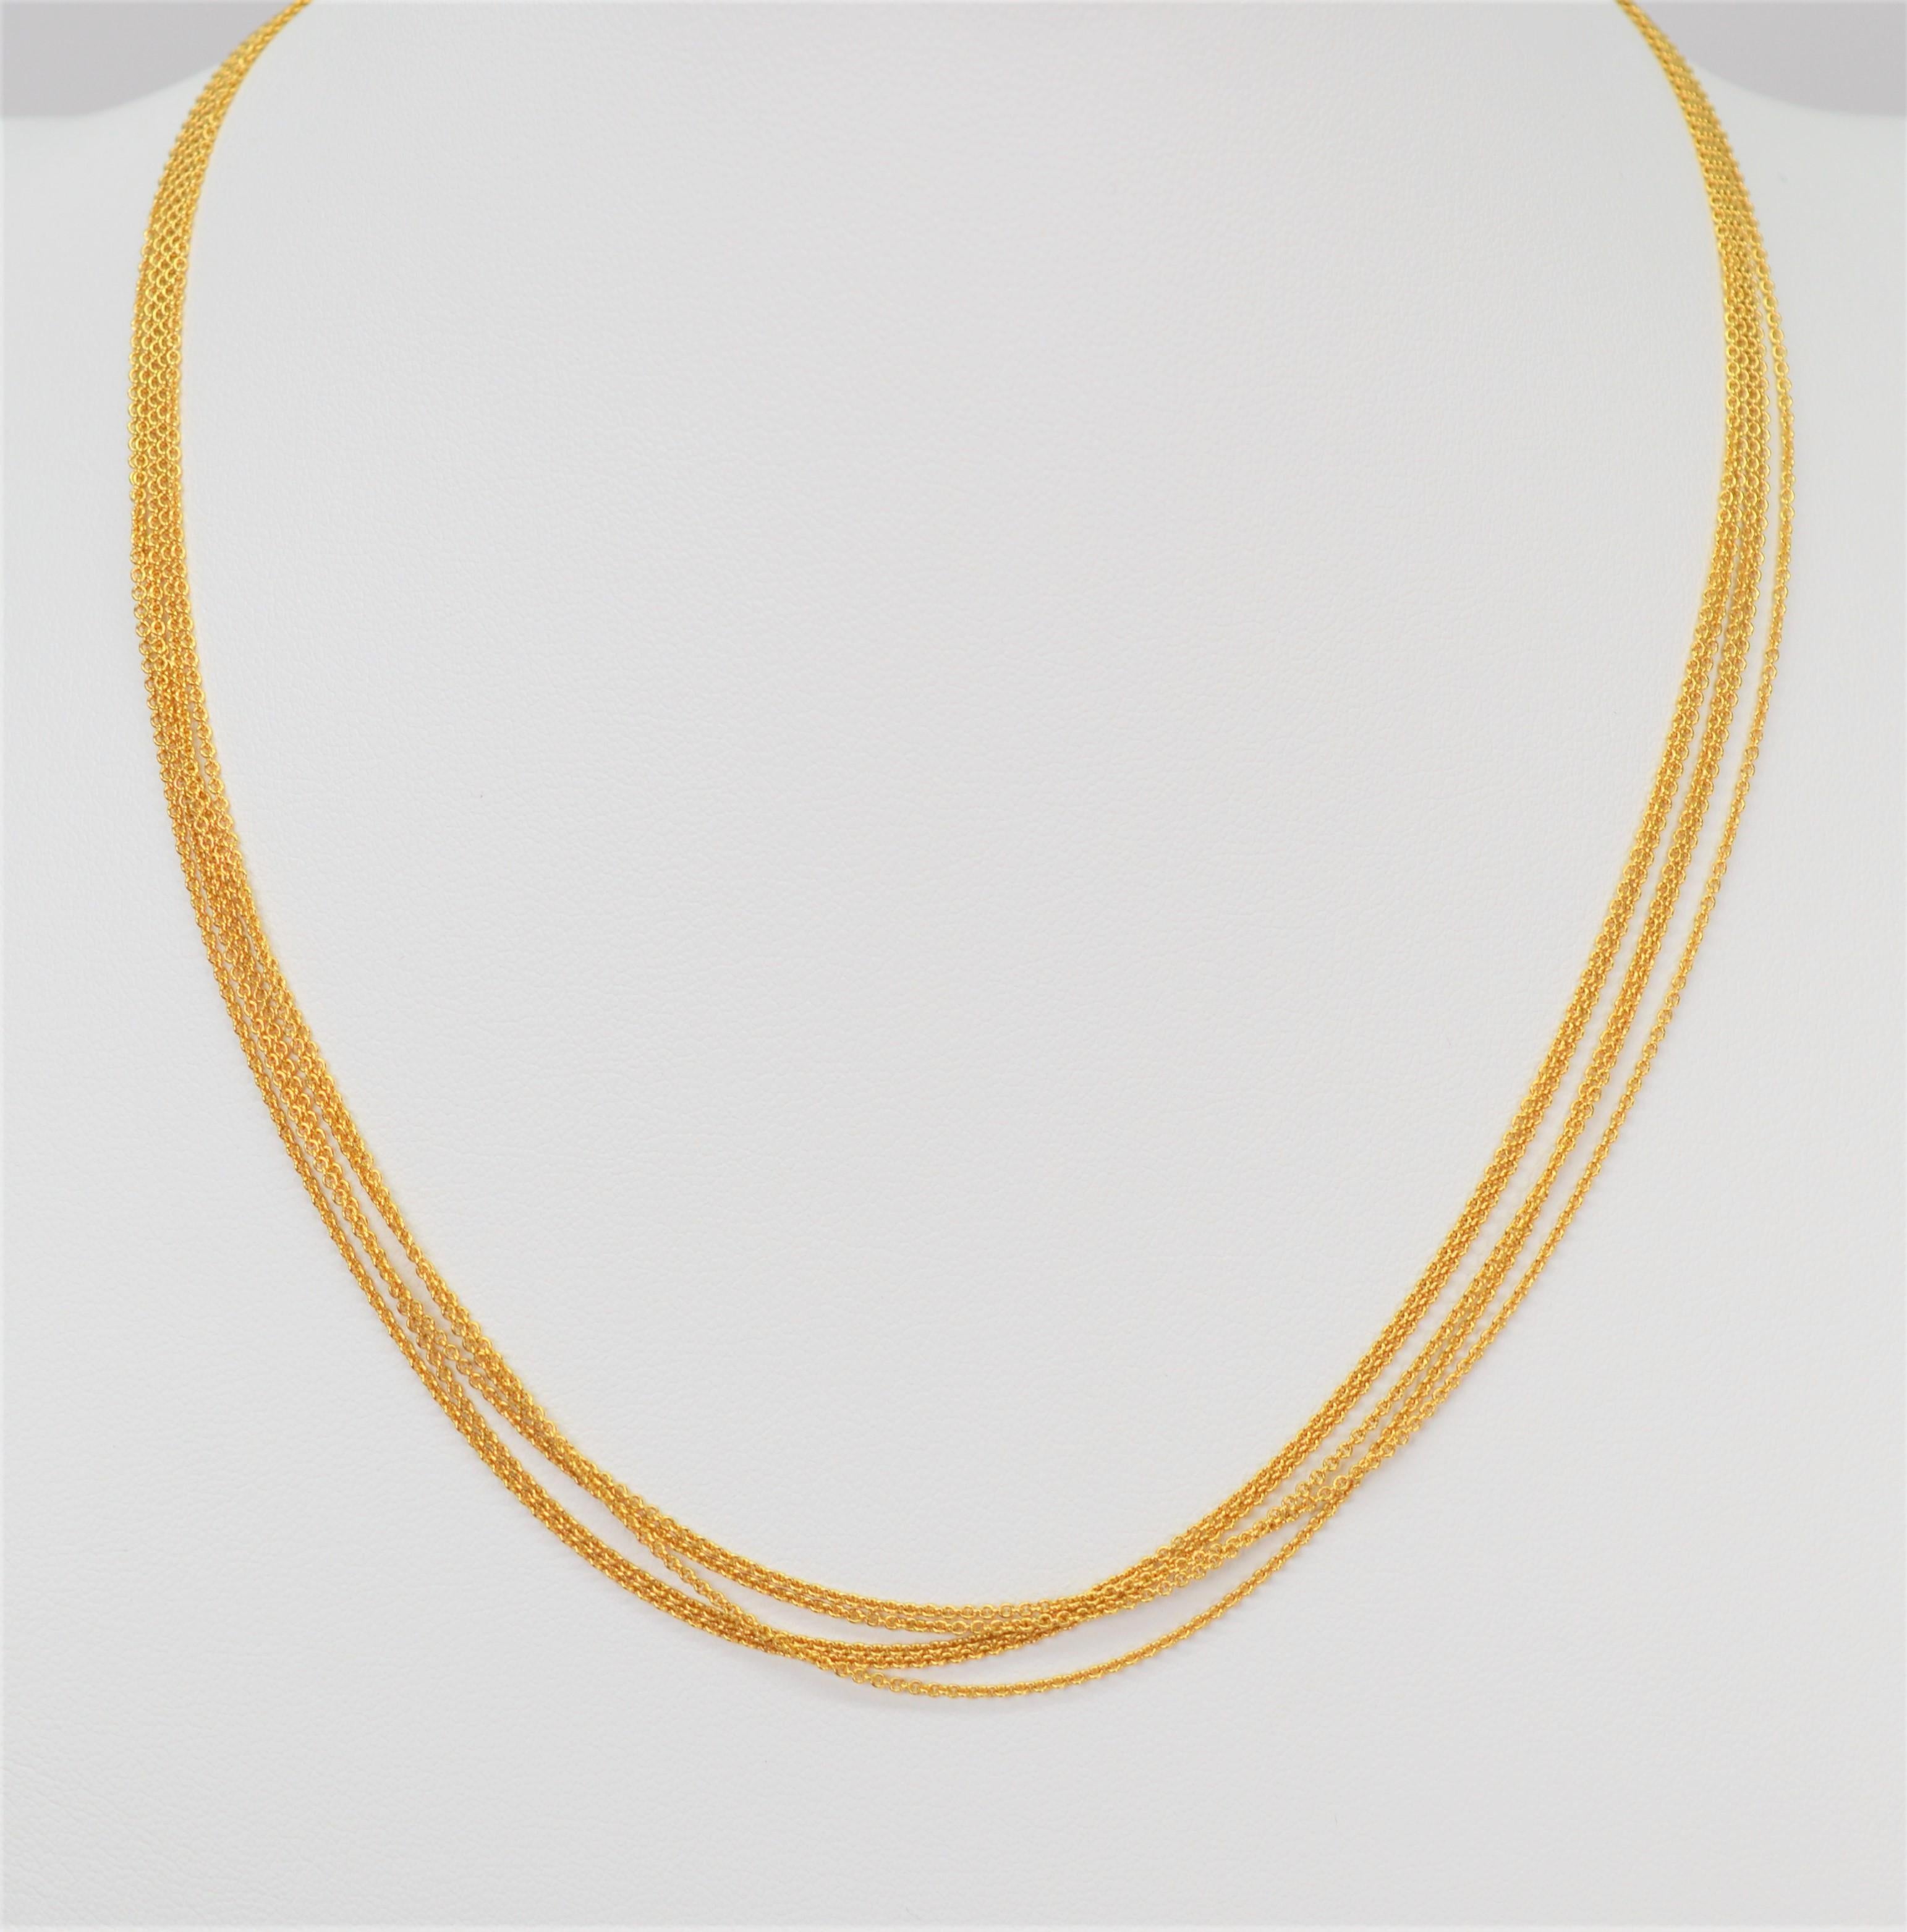 Simple yet impactful, five strands of fine one millimeter fourteen karat 14K yellow gold Italian made cable chain are nestled together and drape to form the on-trend multi-layered look of this 16.5 inch necklace. Stamped 14K / Italy and finished